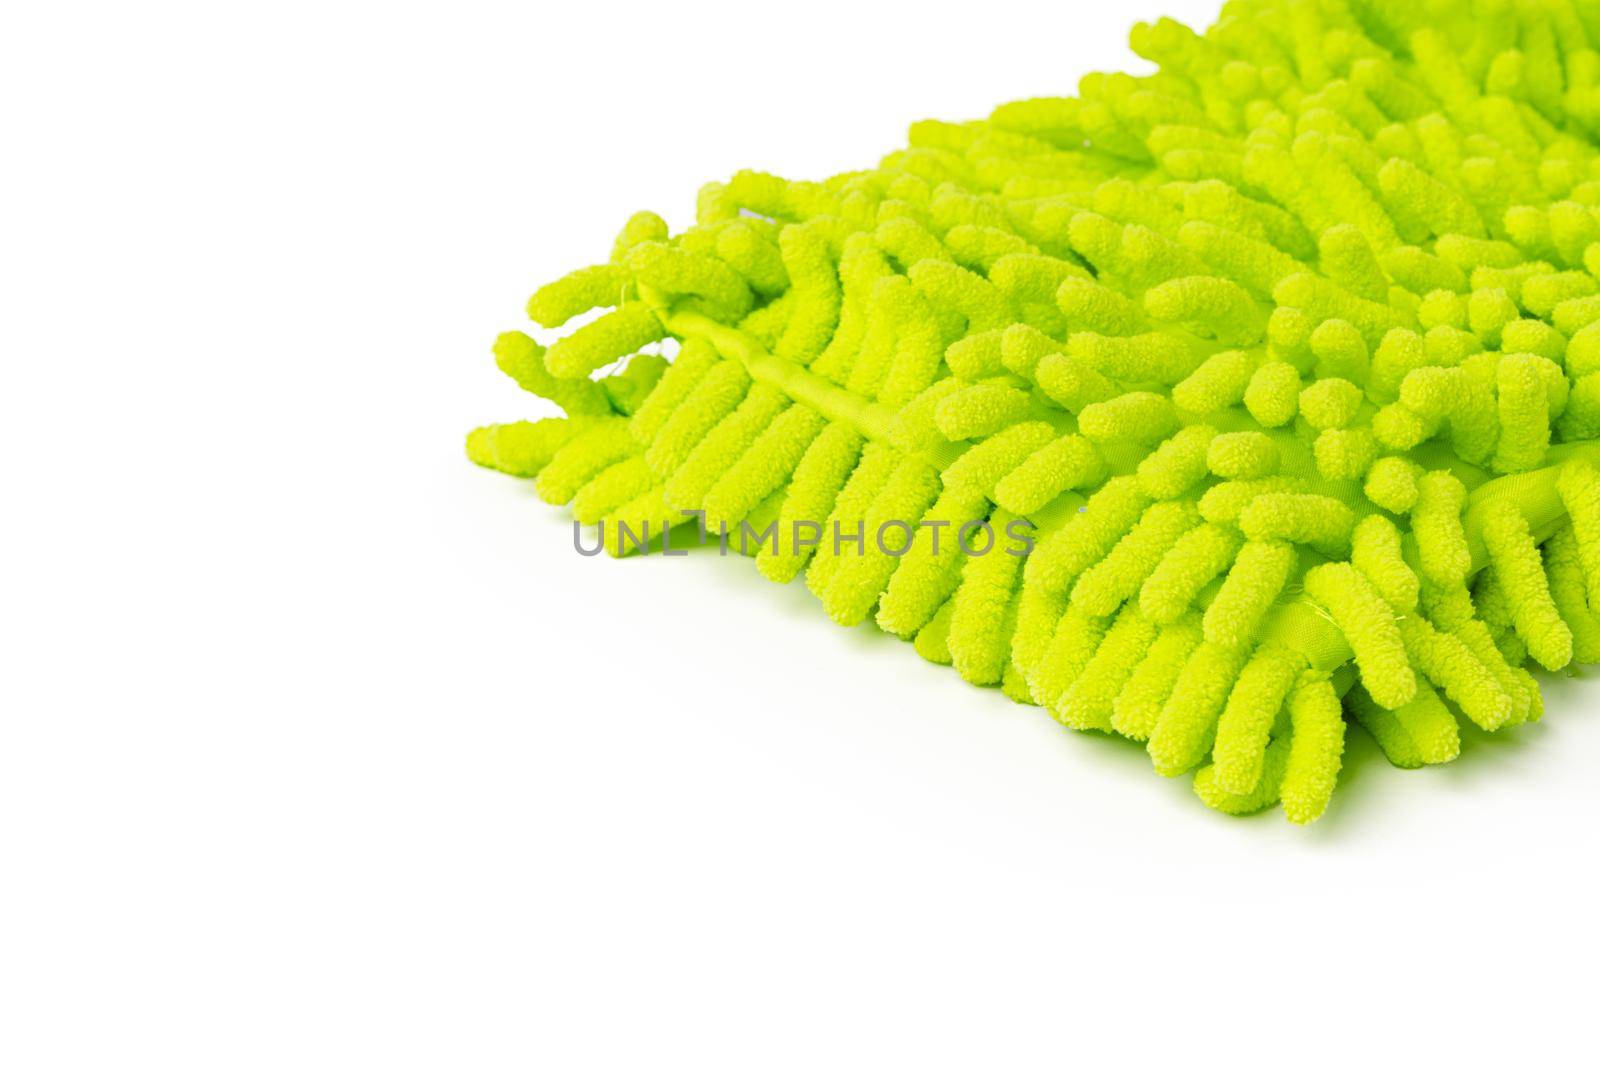 Cleaning floor mop isolated on white background by Fabrikasimf